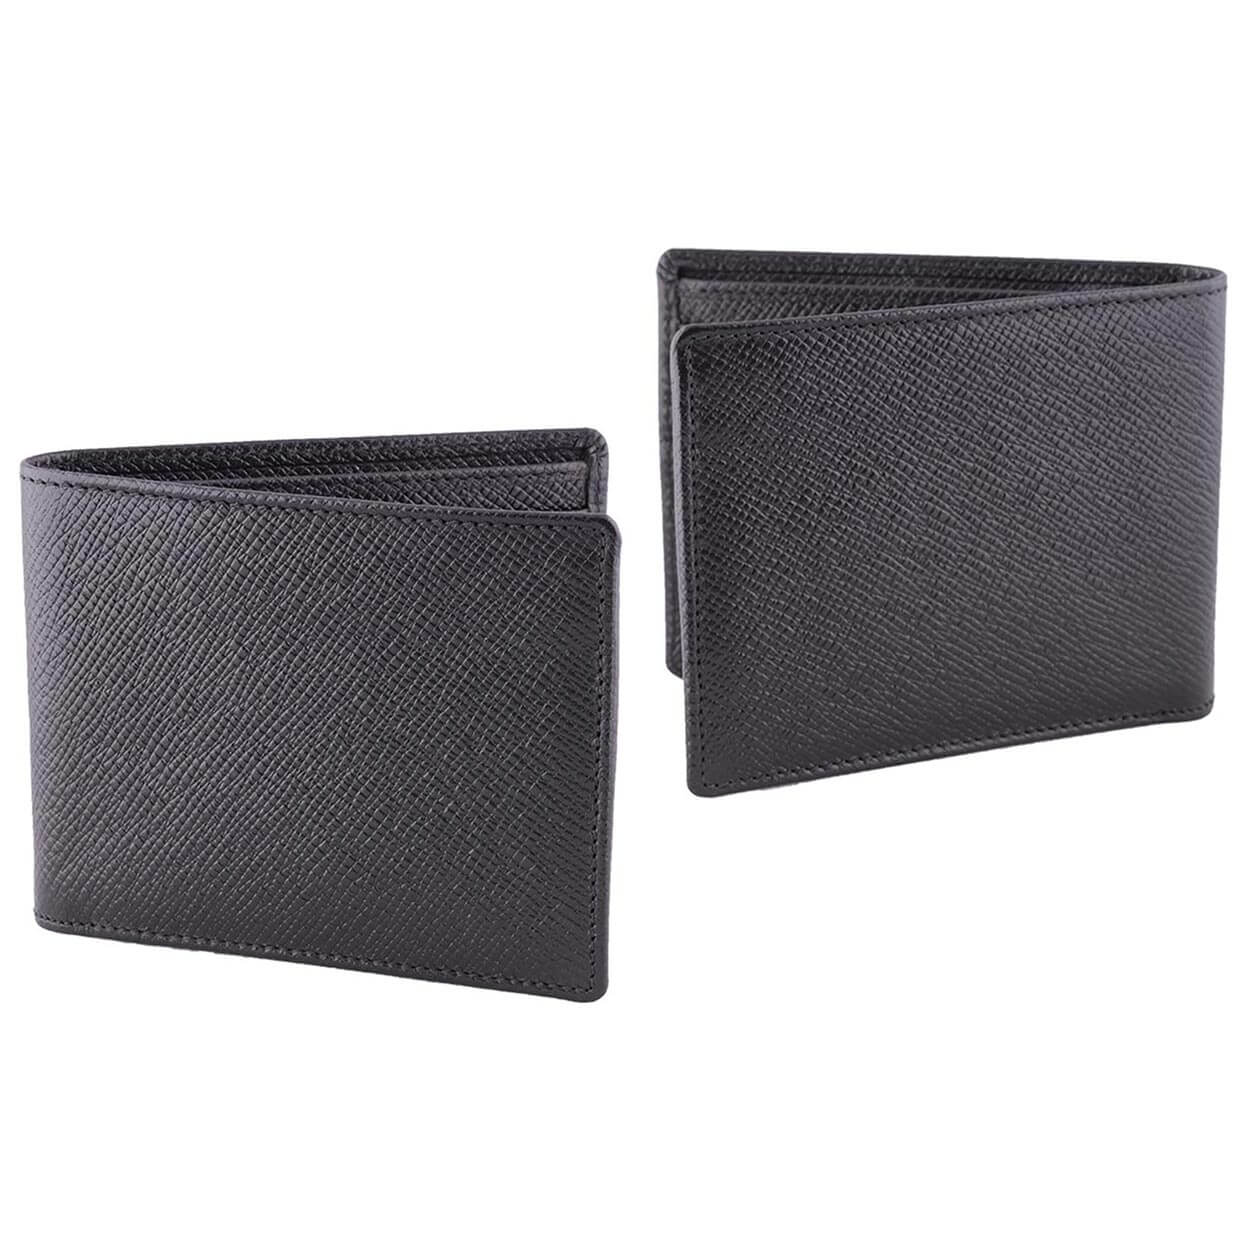 DiLoro Men's Saffiano Style Slim Bifold Leather Wallet in Firenze Black - Front  and Back Outside View